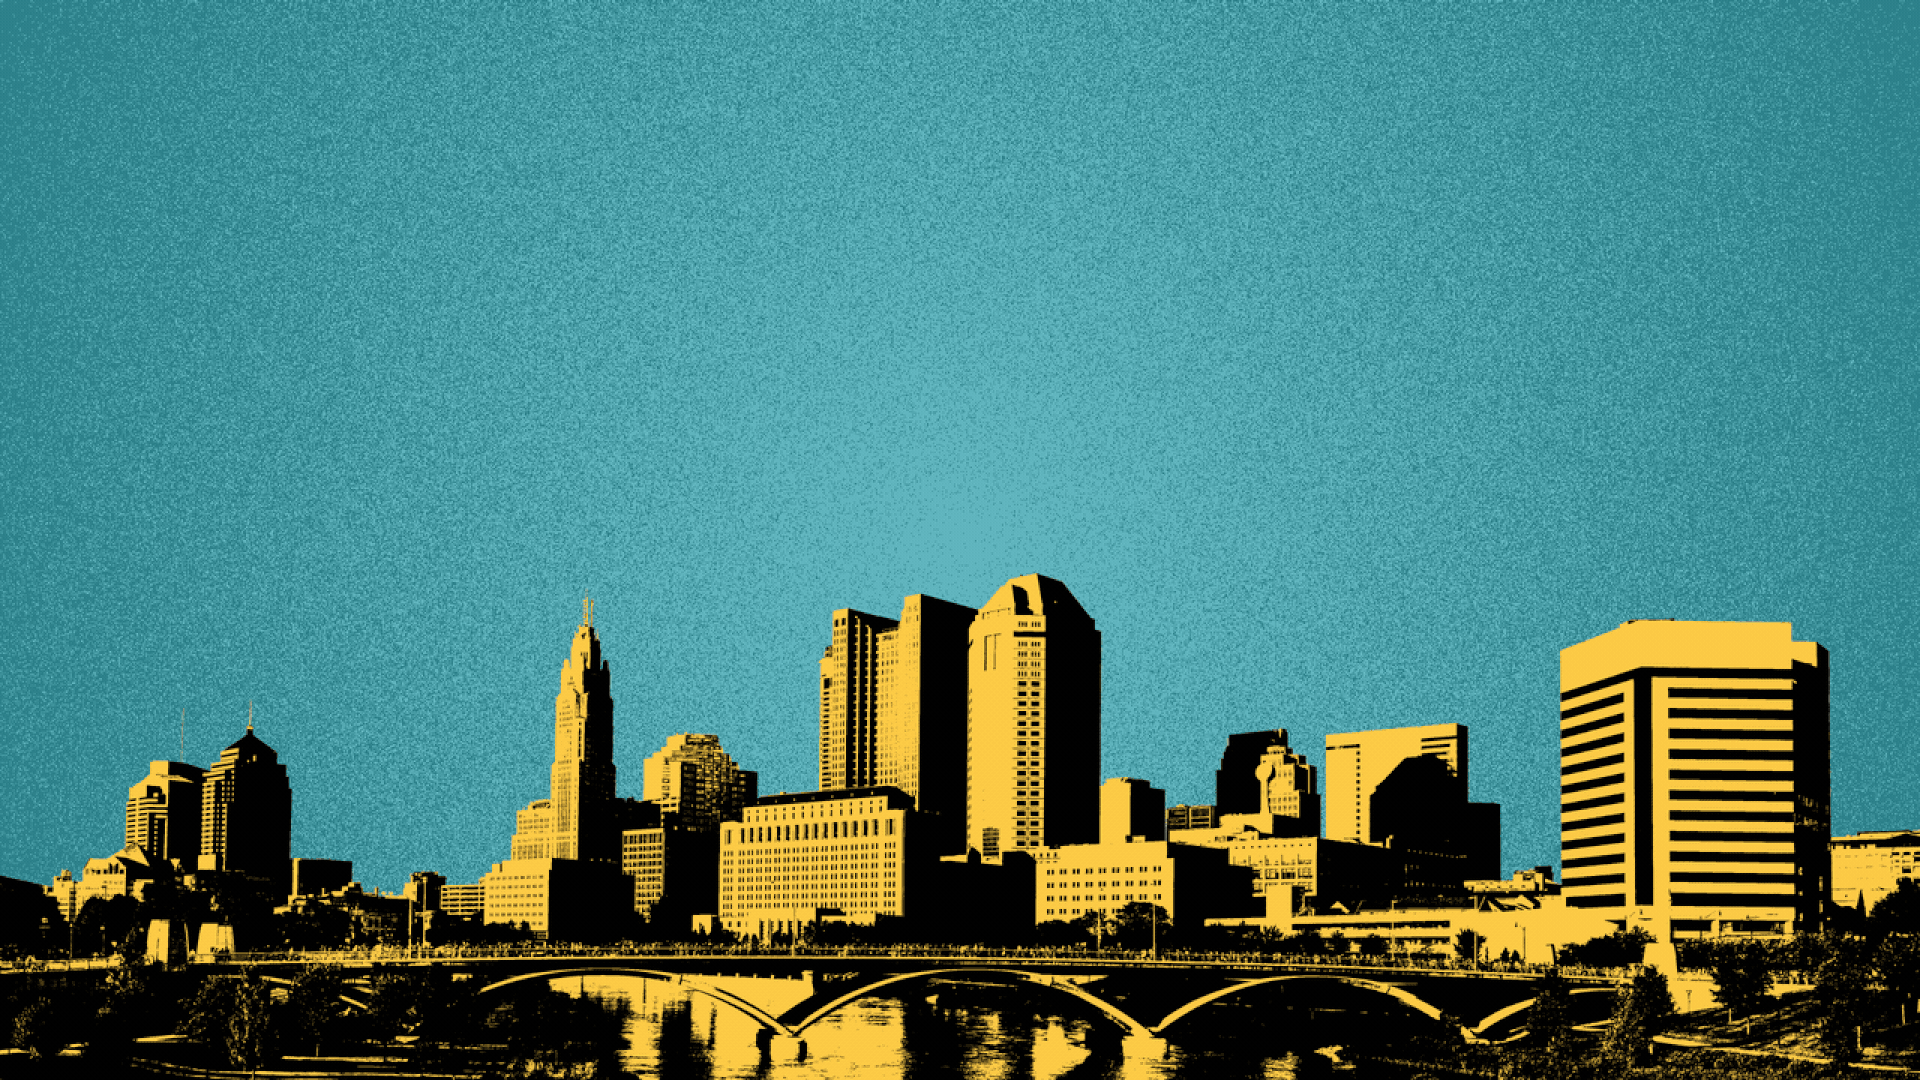 Illustration of the Columbus skyline, with word balloons with exclamation points in them popping up across the city.